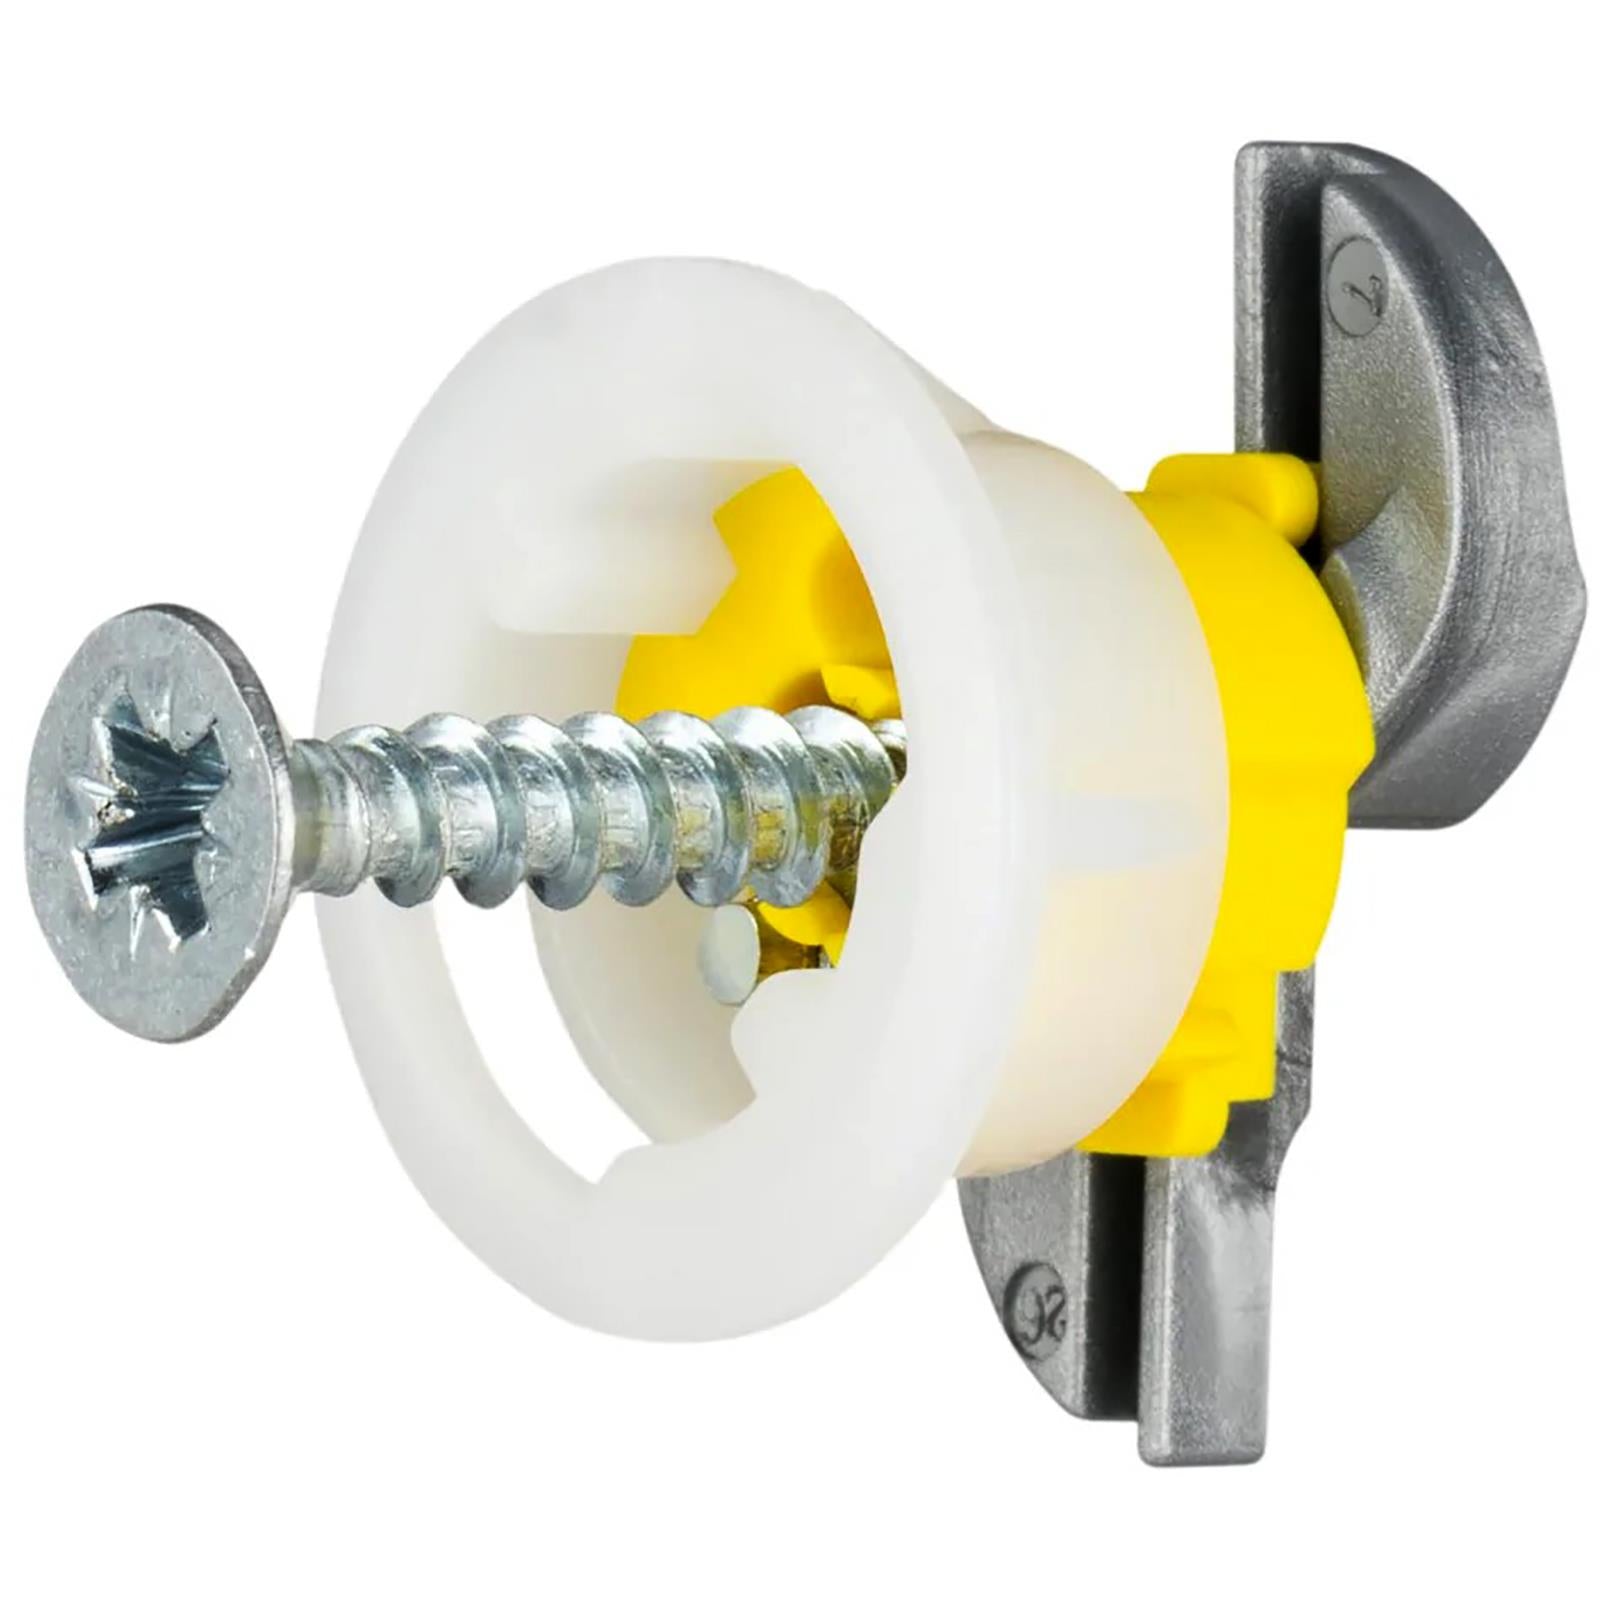 GripIt Yellow Plasterboard Fixings 15mm 8 Pack